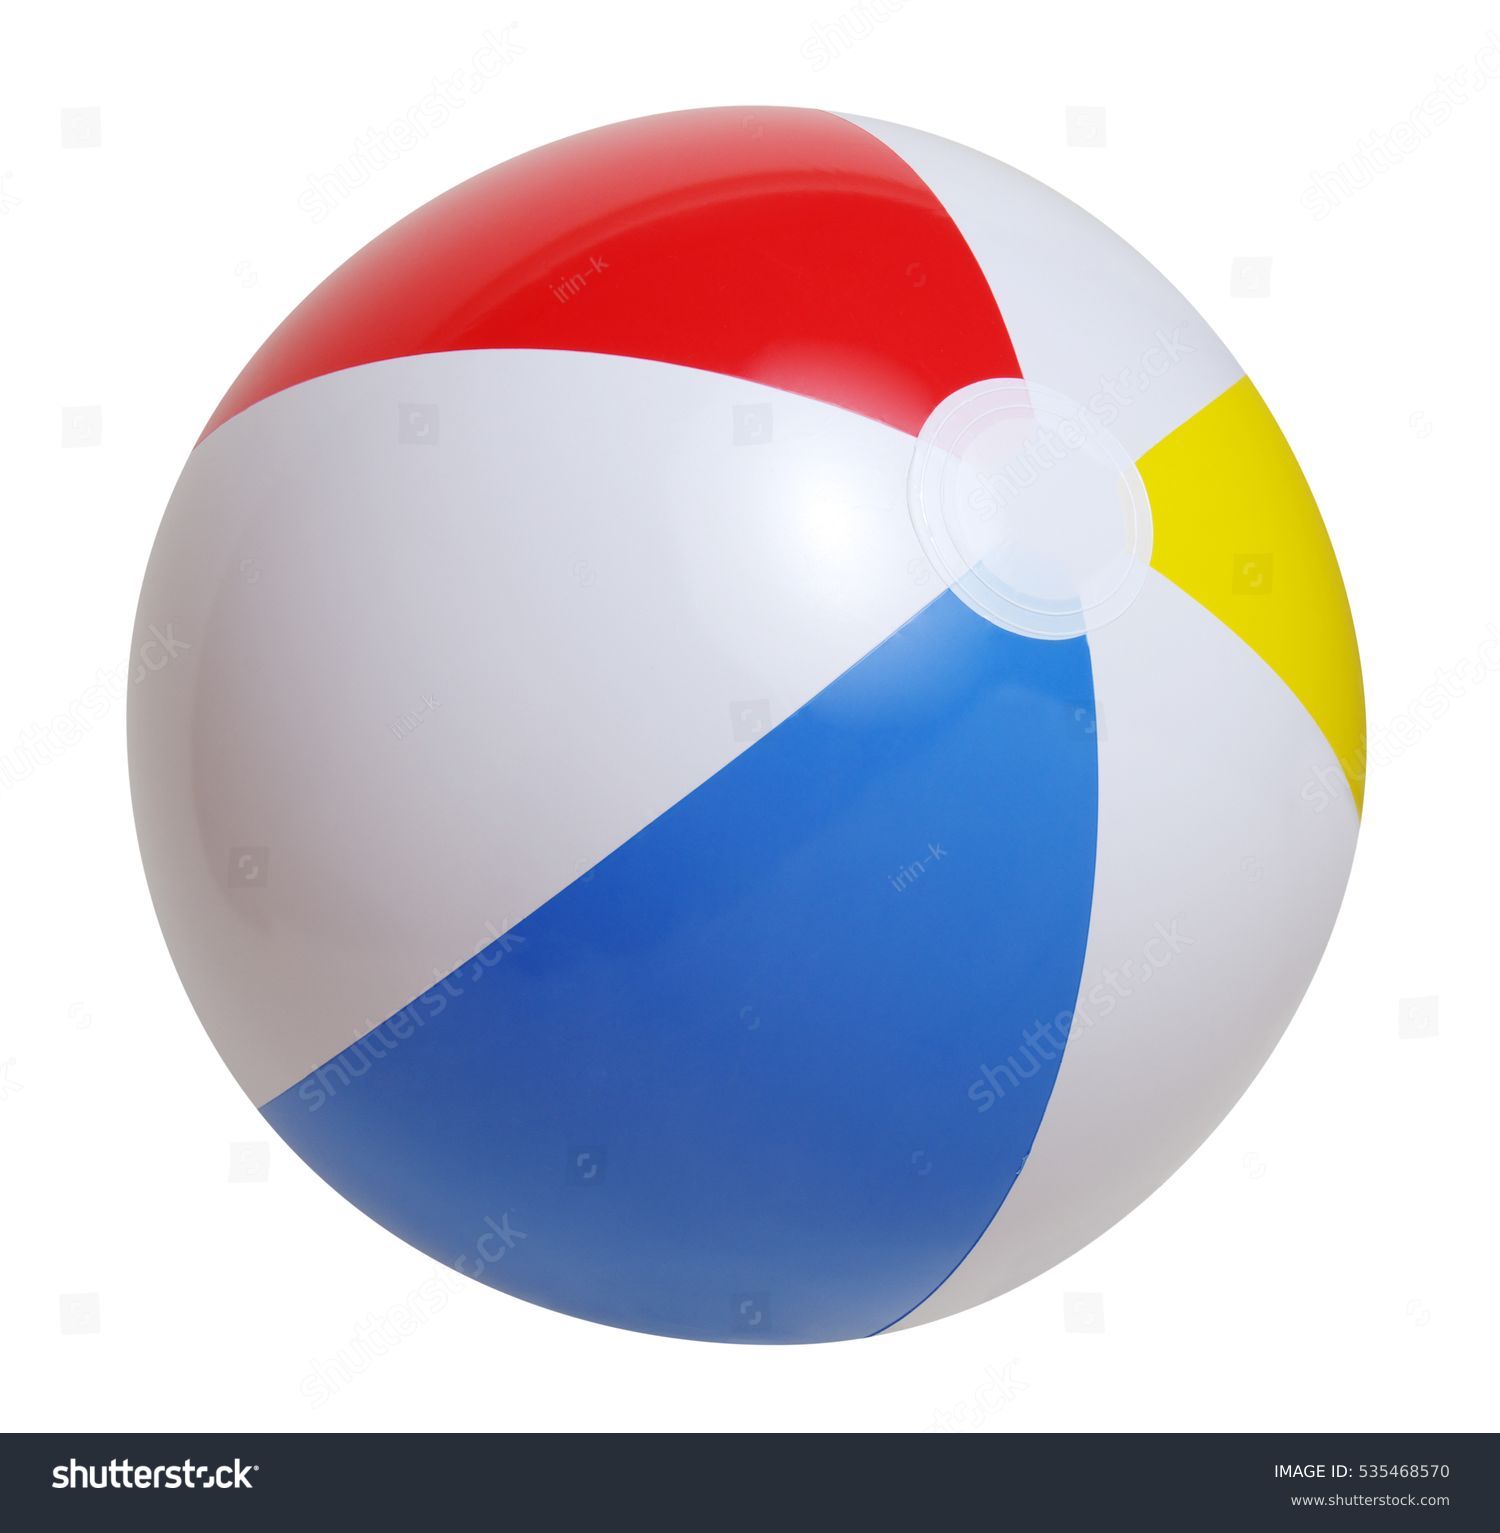 Beach ball isolated on a white background #535468570